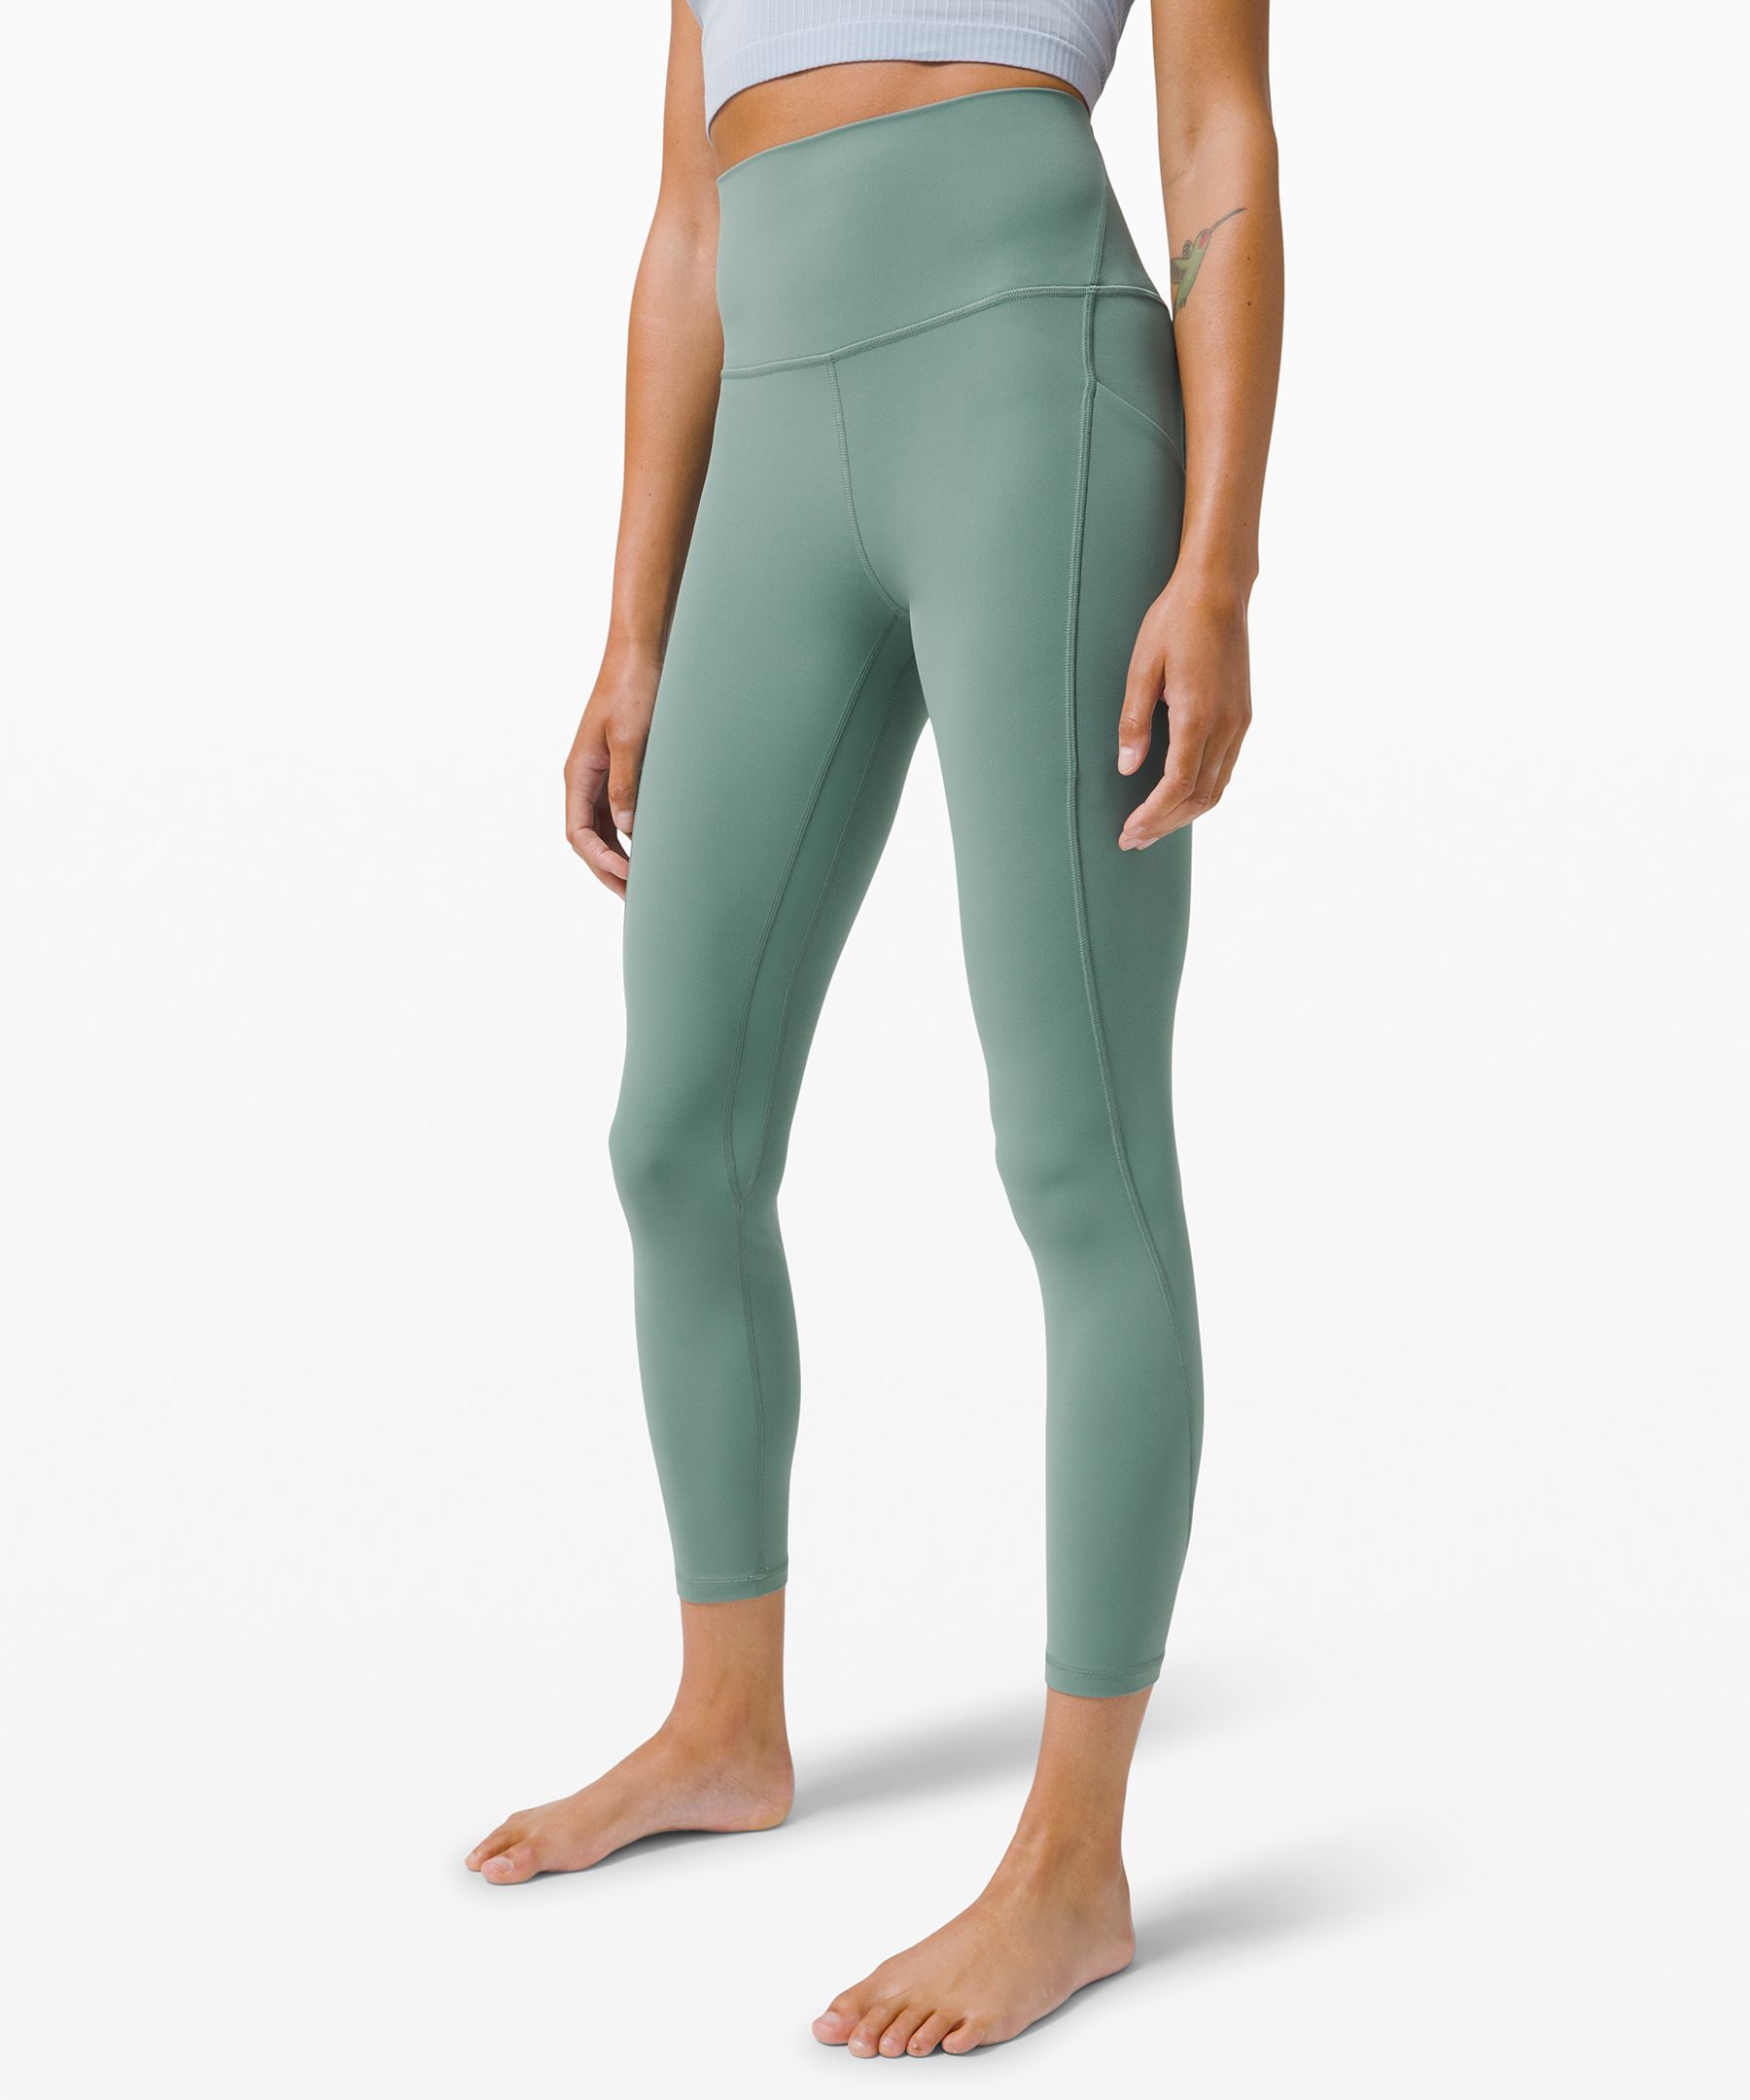 Lululemon Align™ High-rise Pants With Pockets 25"